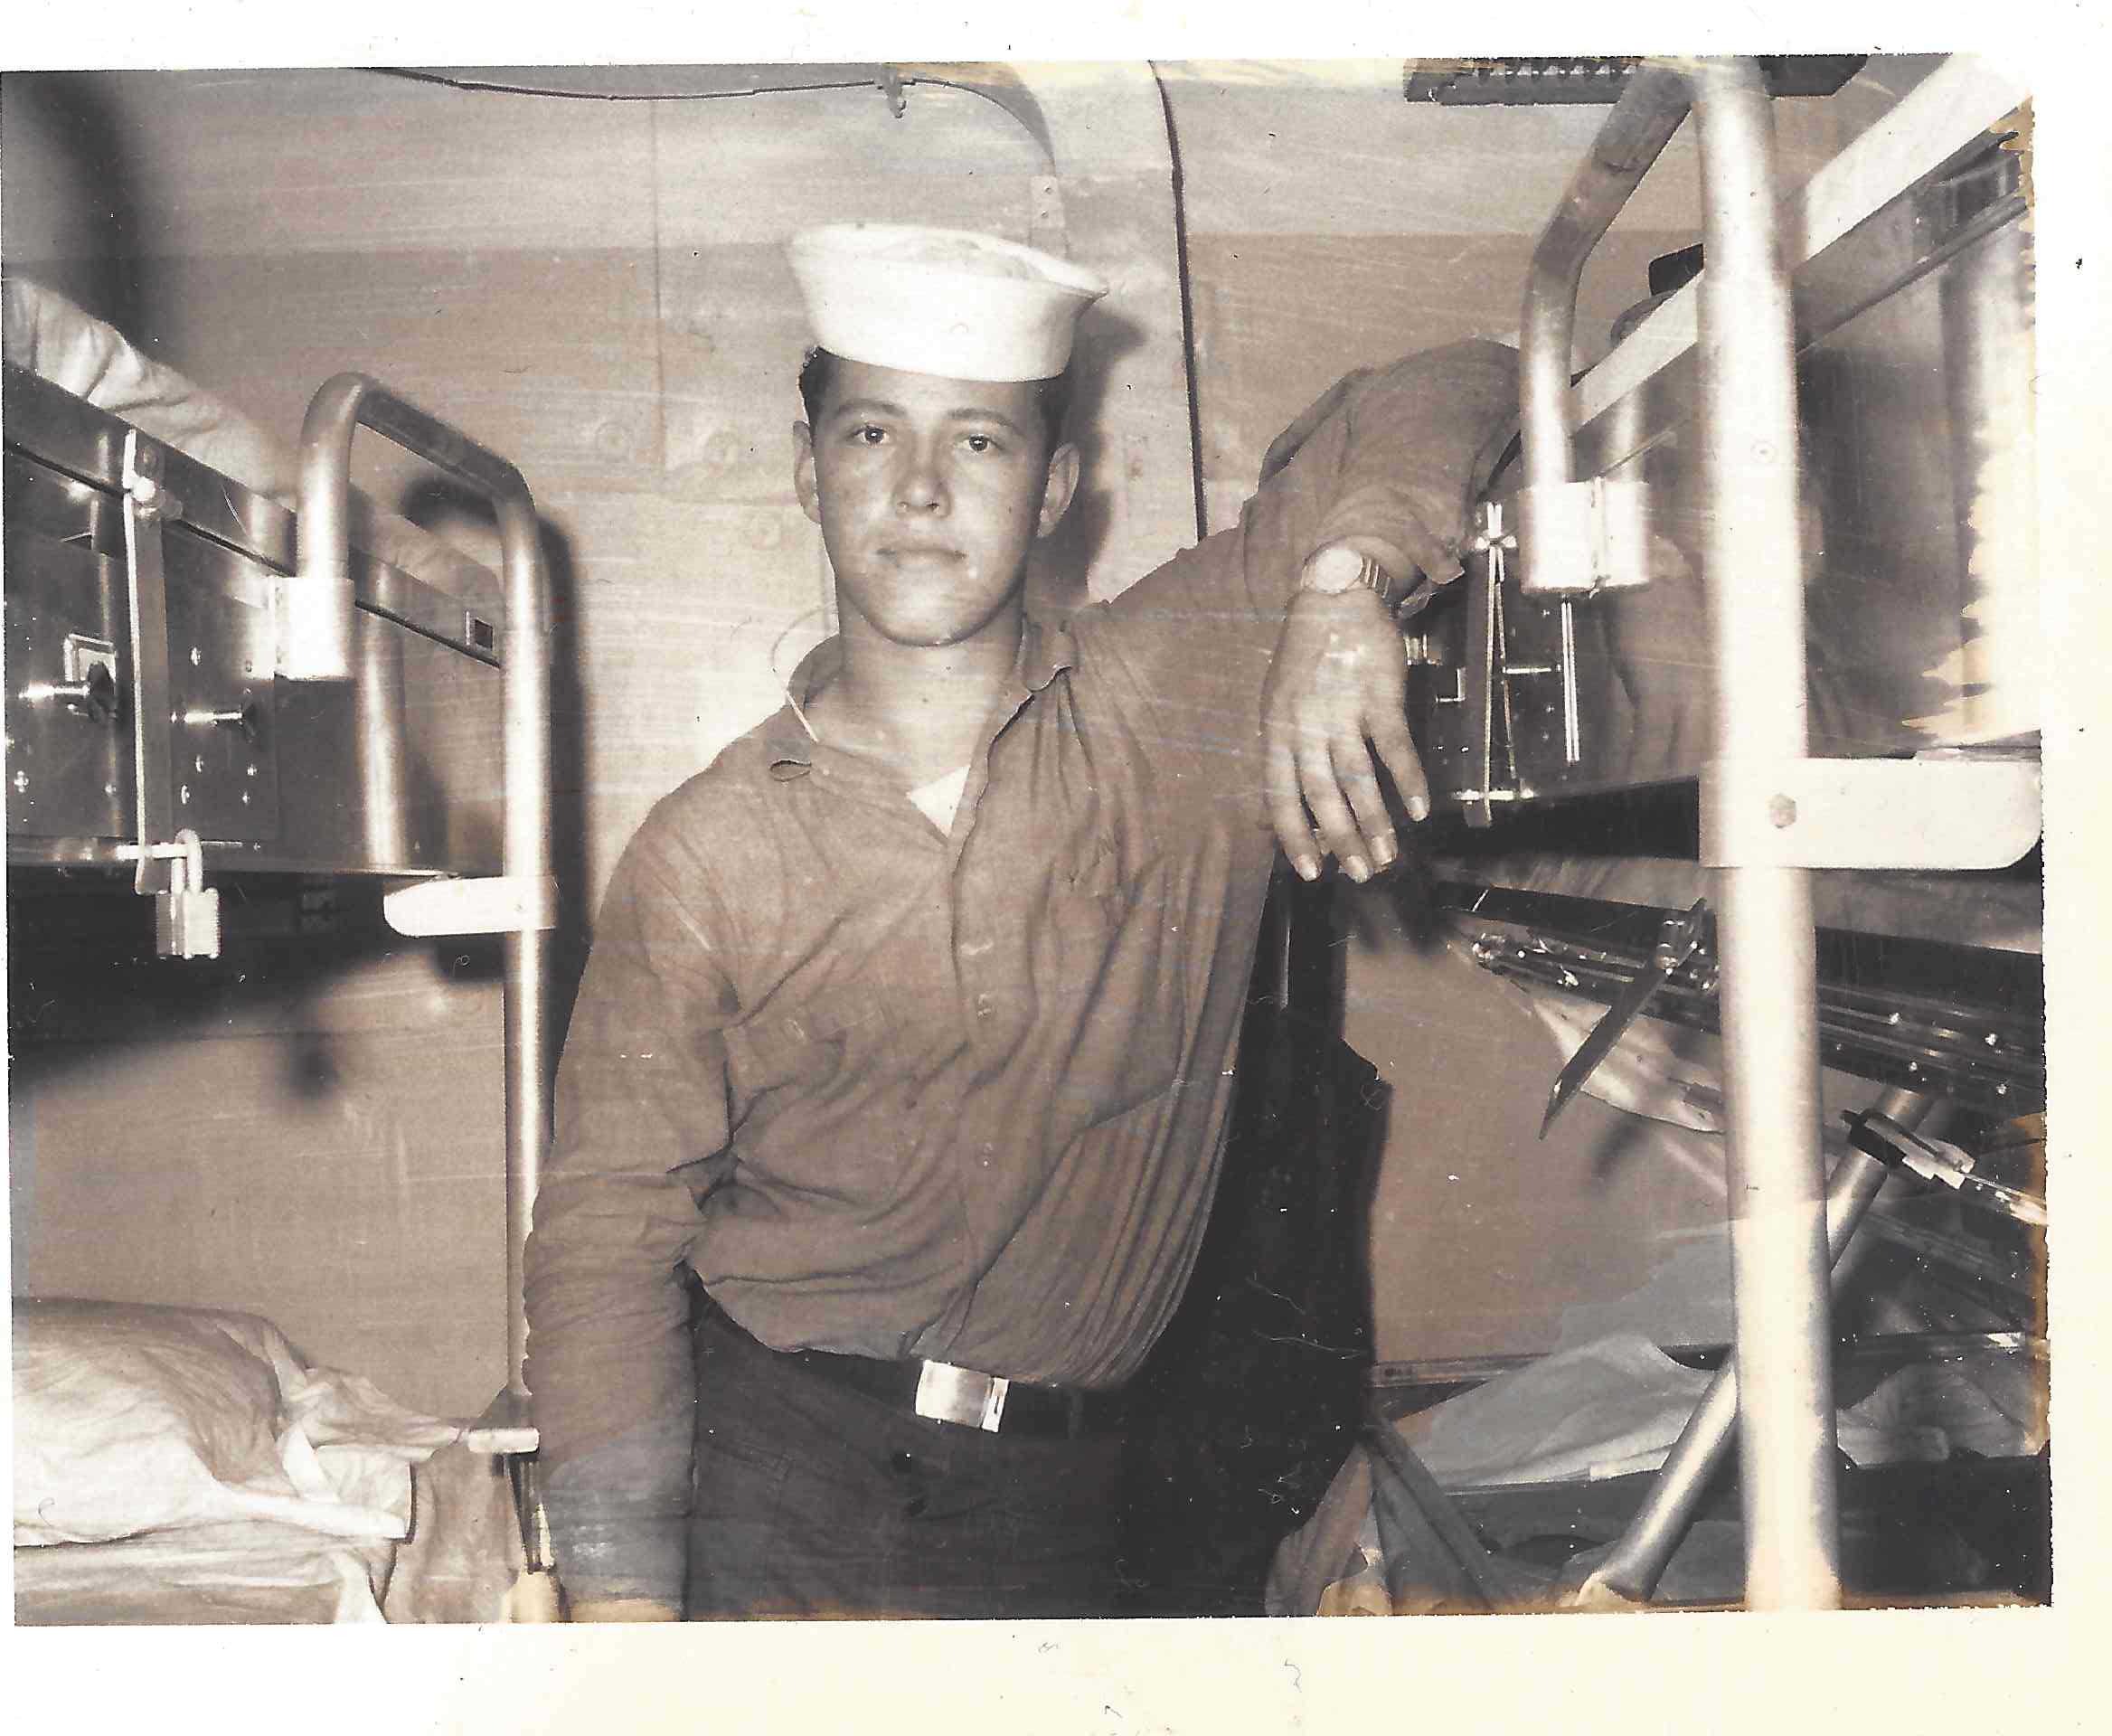 Dan Young, Navy Missile Tester on U.S.S. Chicago, 1969.